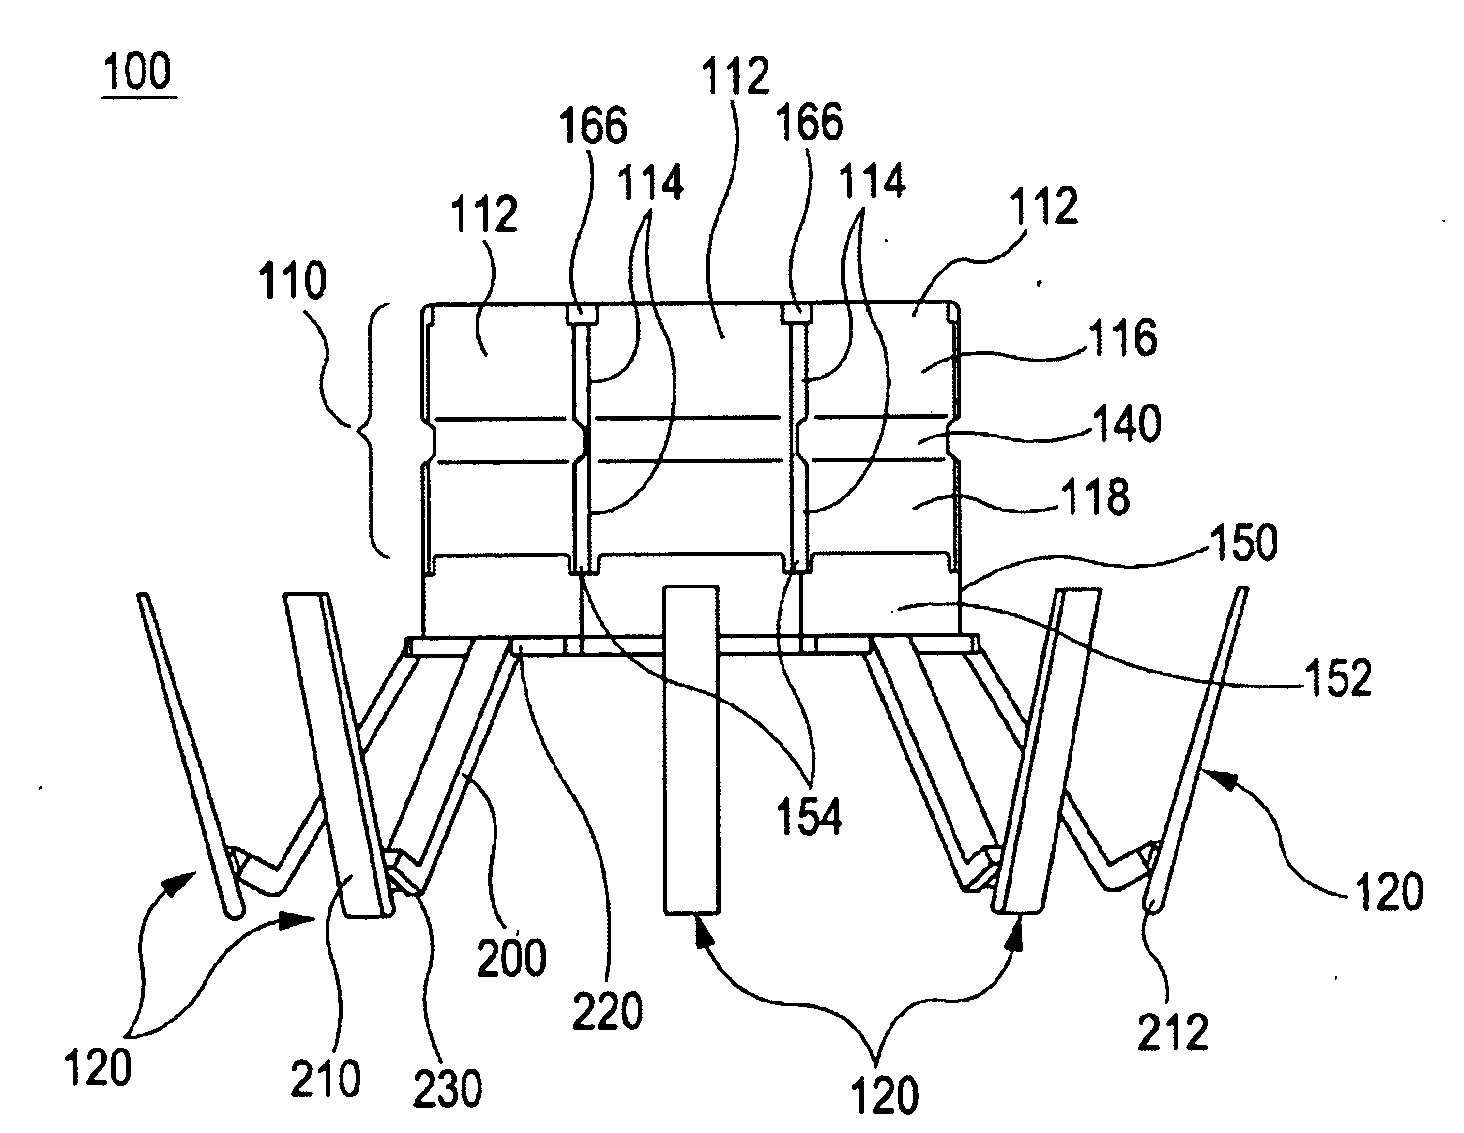 Wire accommodation apparatus